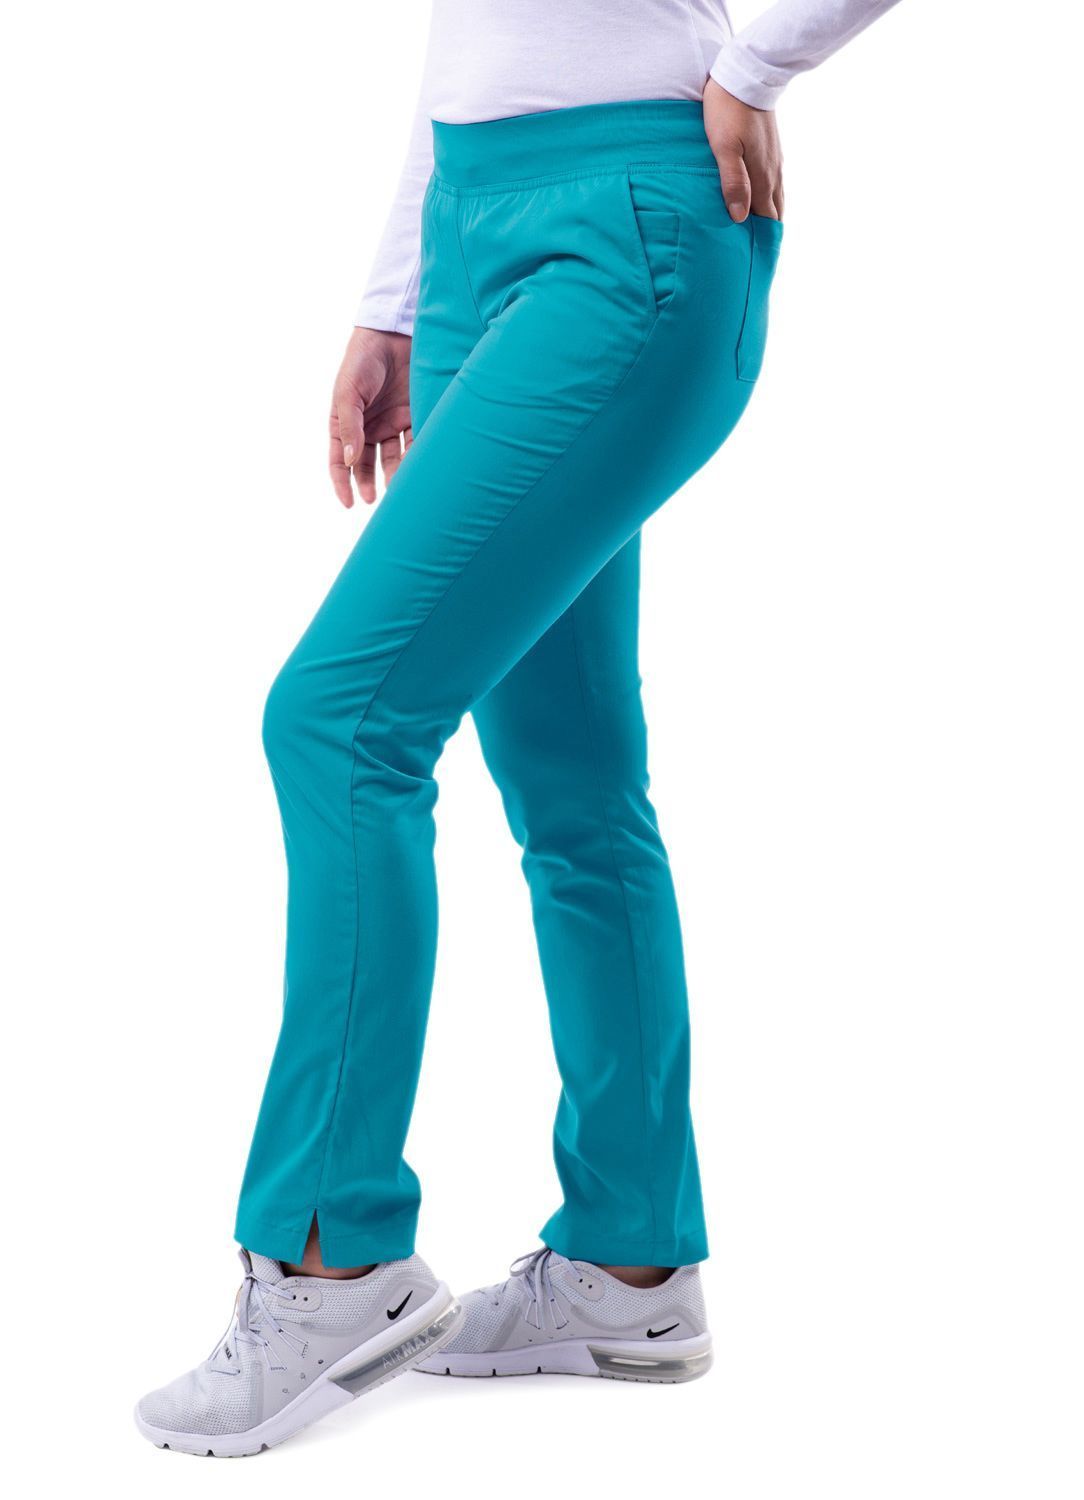 Womens Pant Yoga Pant with 9 Pockets – Petite (93002P) – A Plus Medical  Scrubs